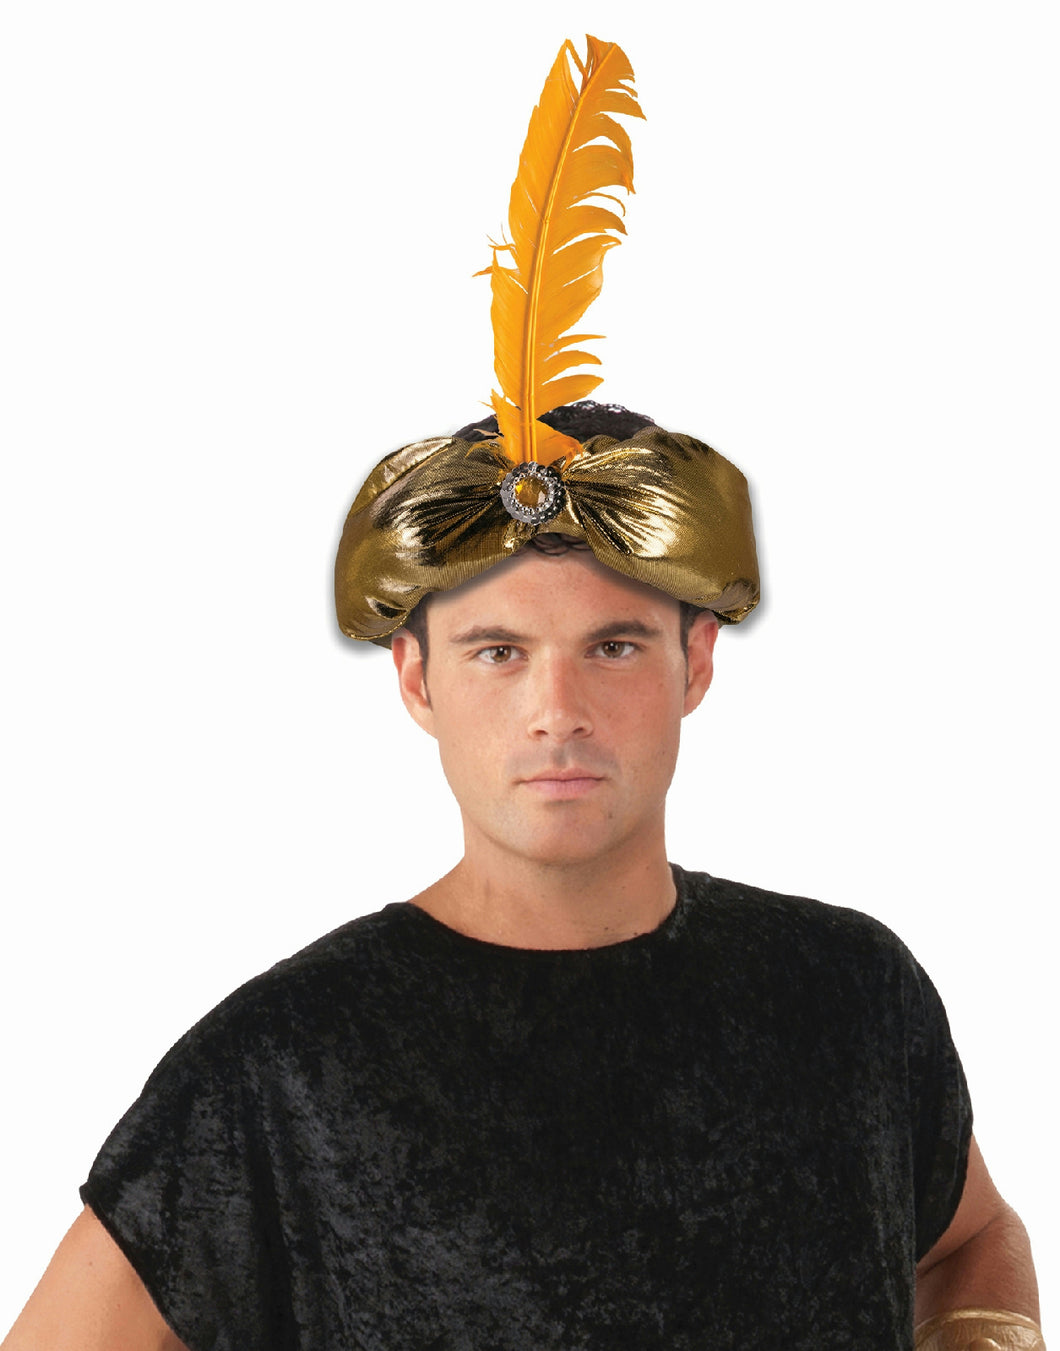 Gold Desert Prince Royal Crown Headpiece Costume Accessory